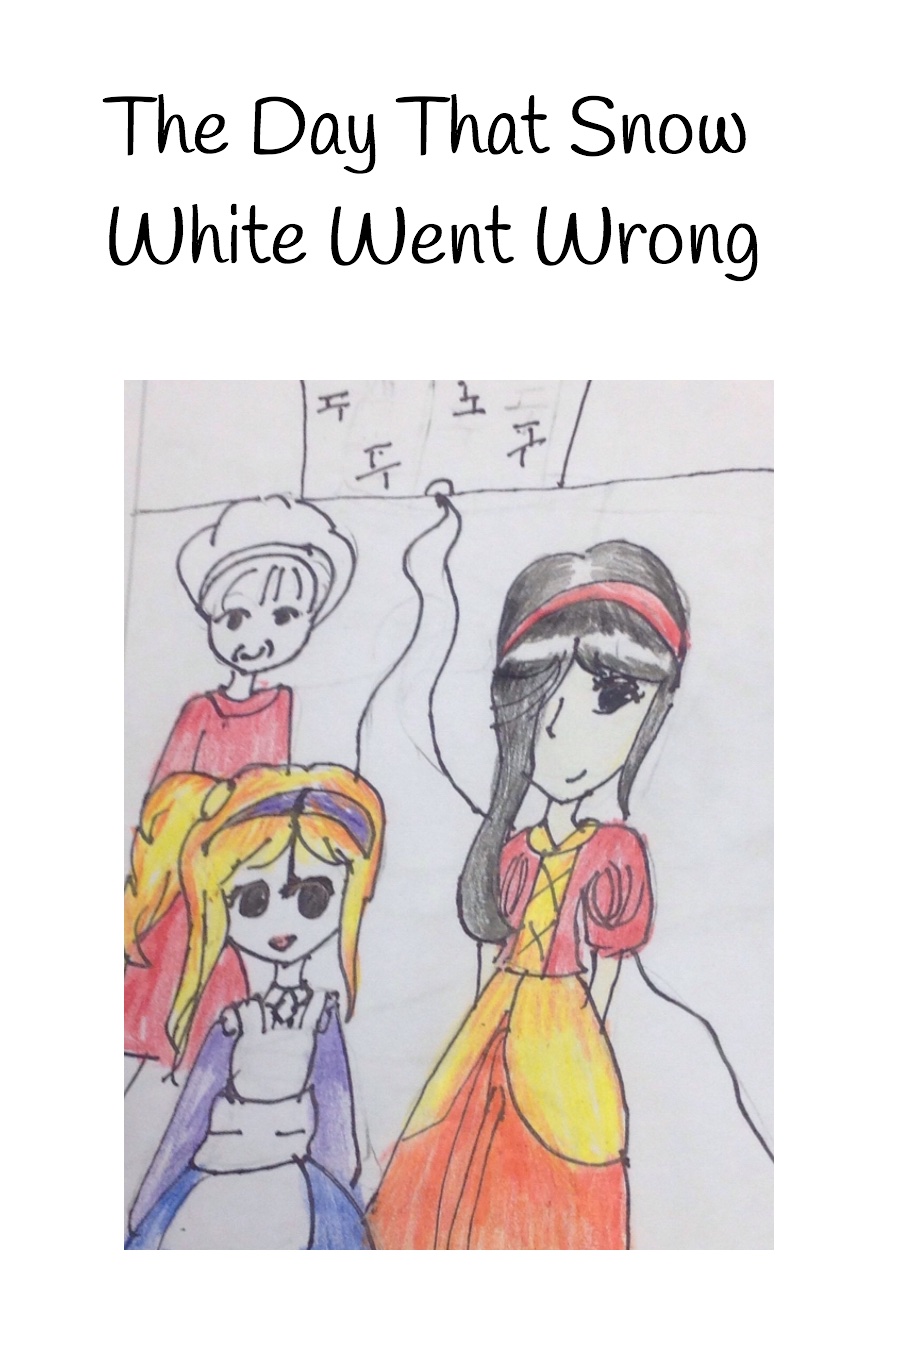 The Day That Snow White Went Wrong by Linda L